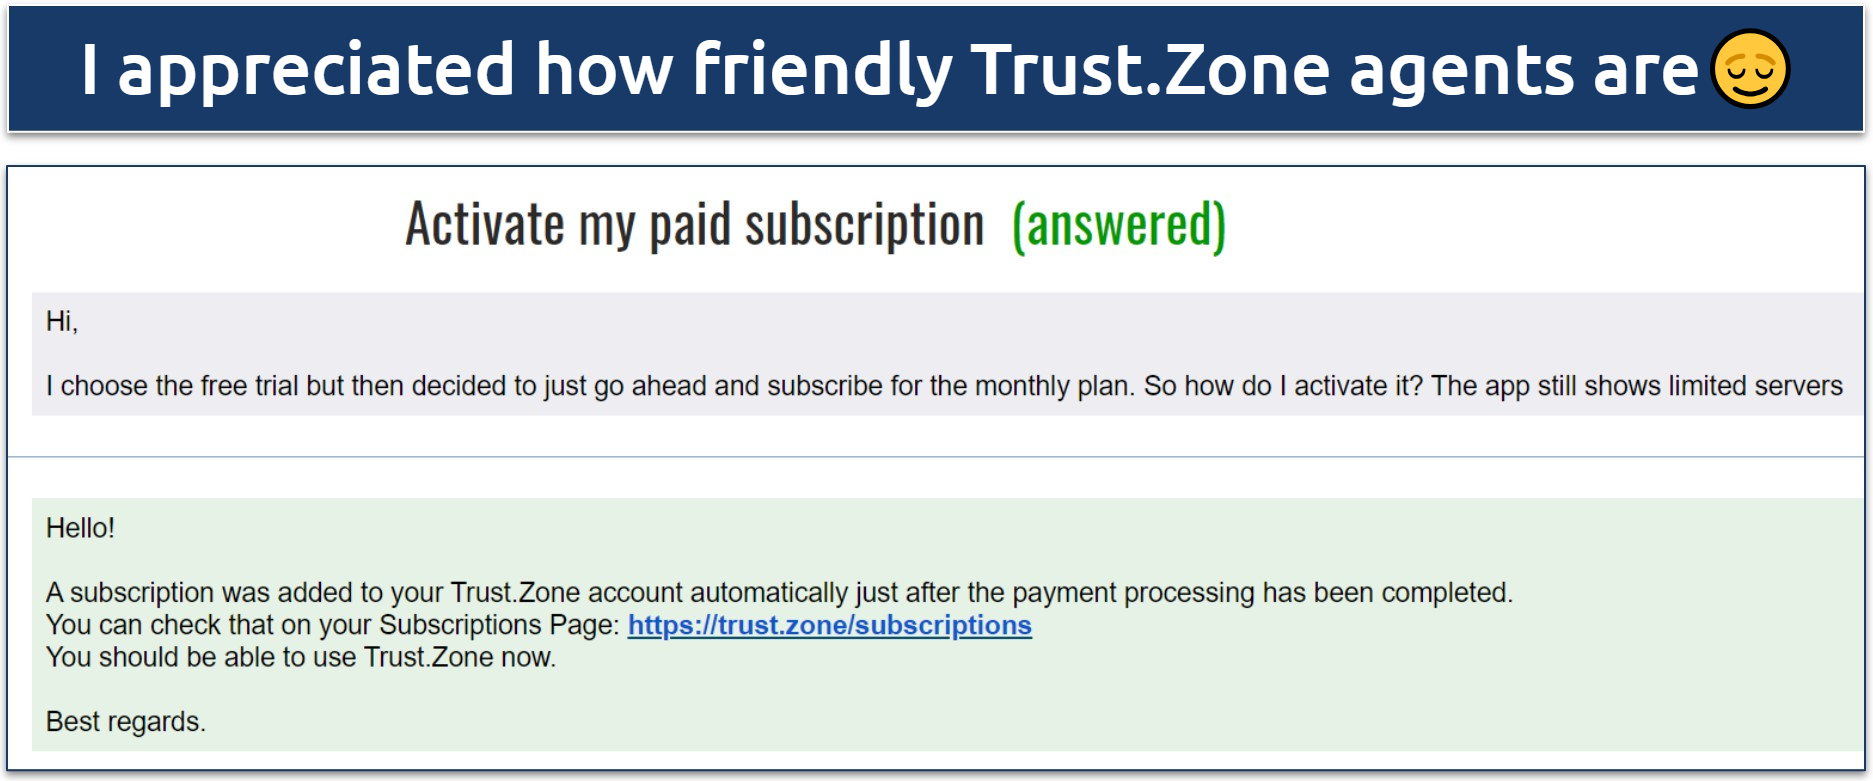 Screenshot of an email conversation with Trust.Zone support where they helped me activate my account 